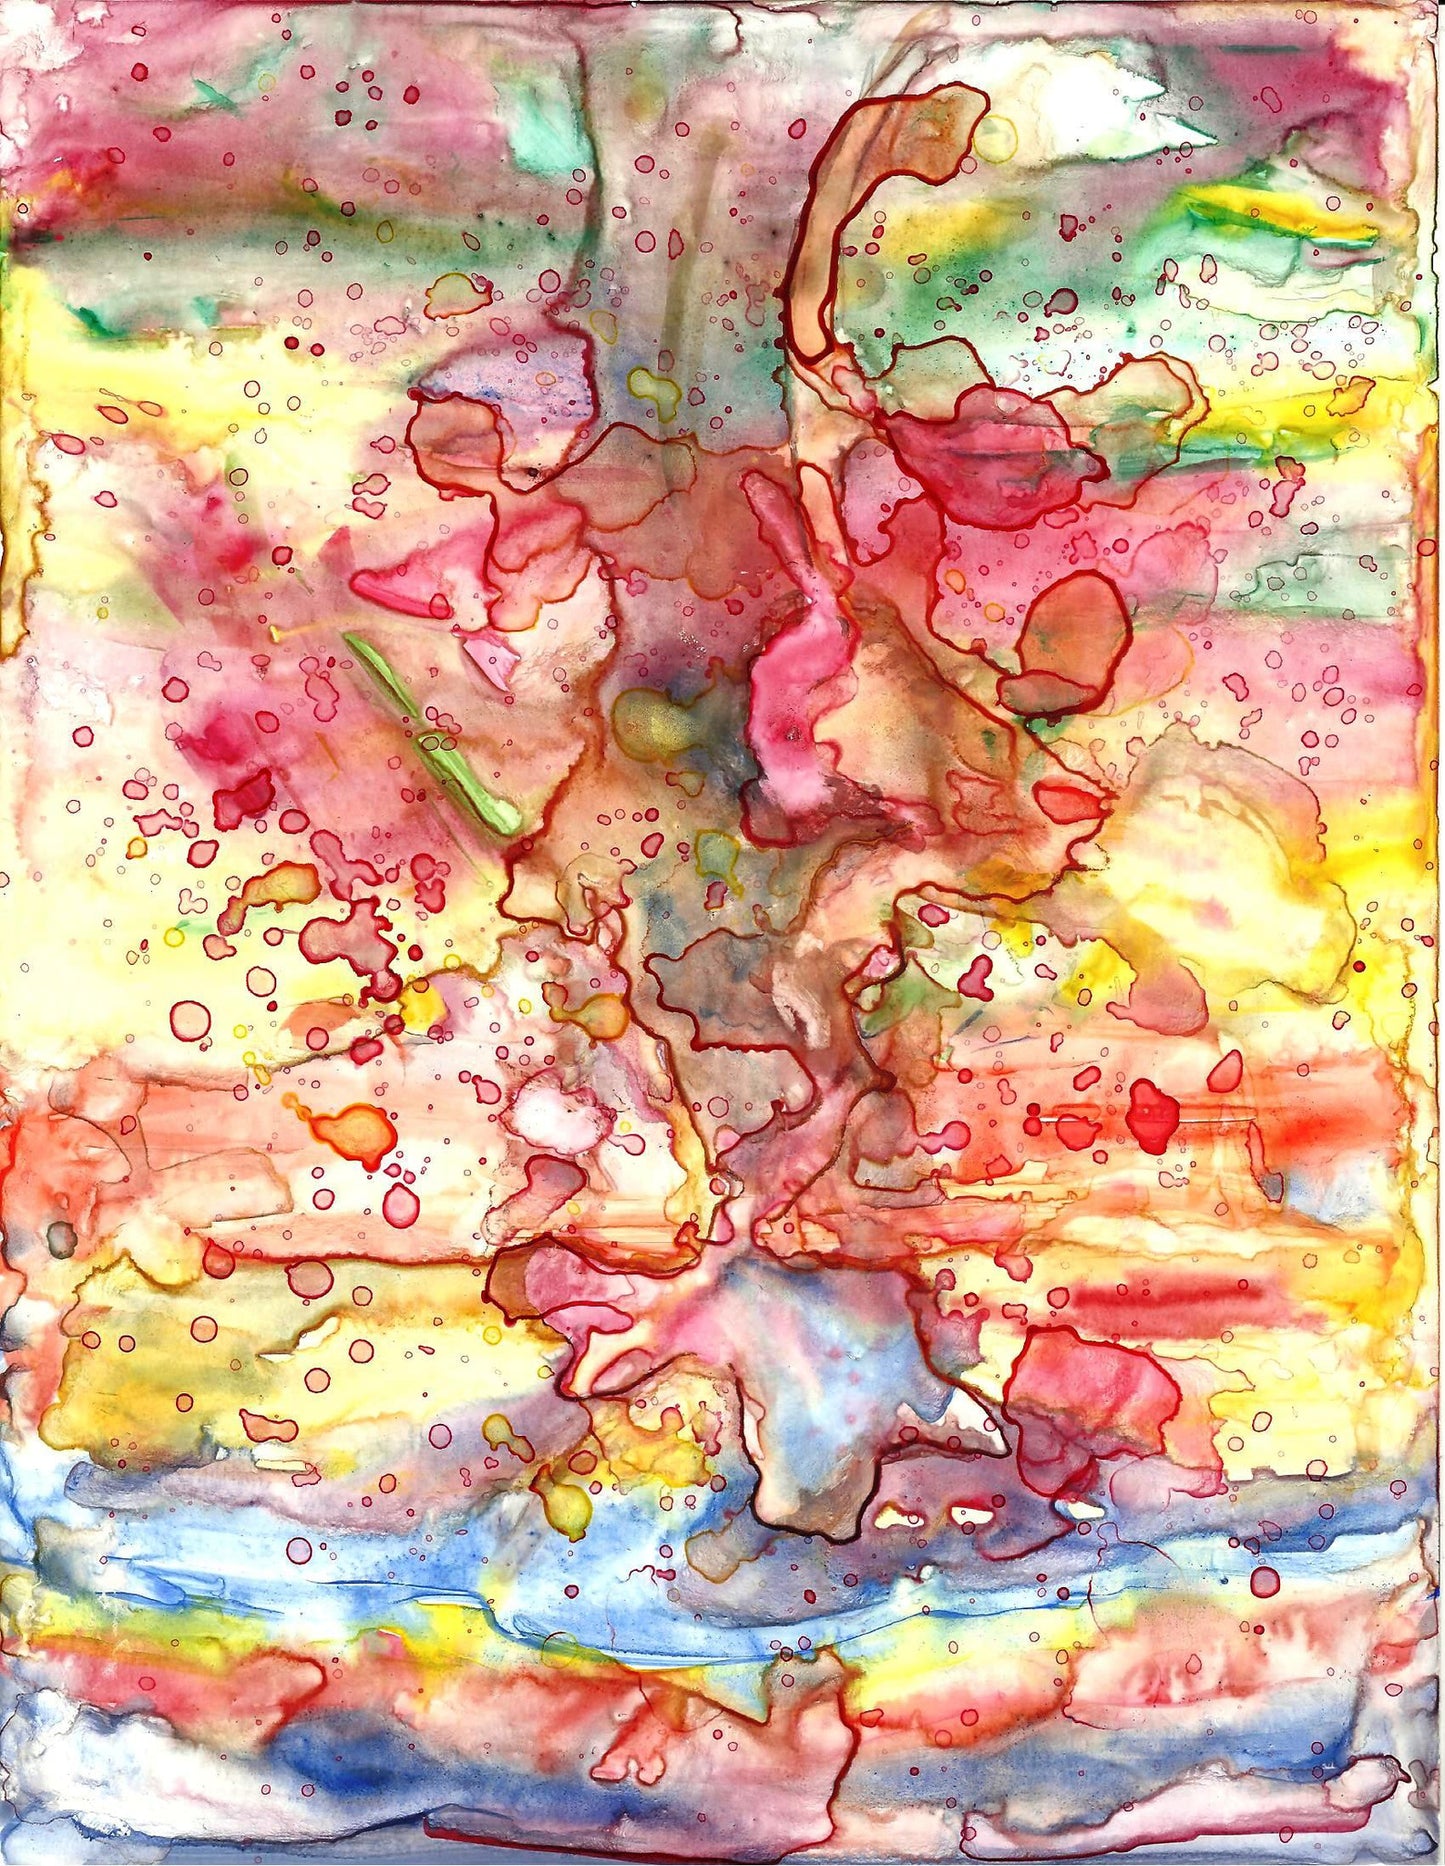 Laying under a tree watching a duck original watercolor painting